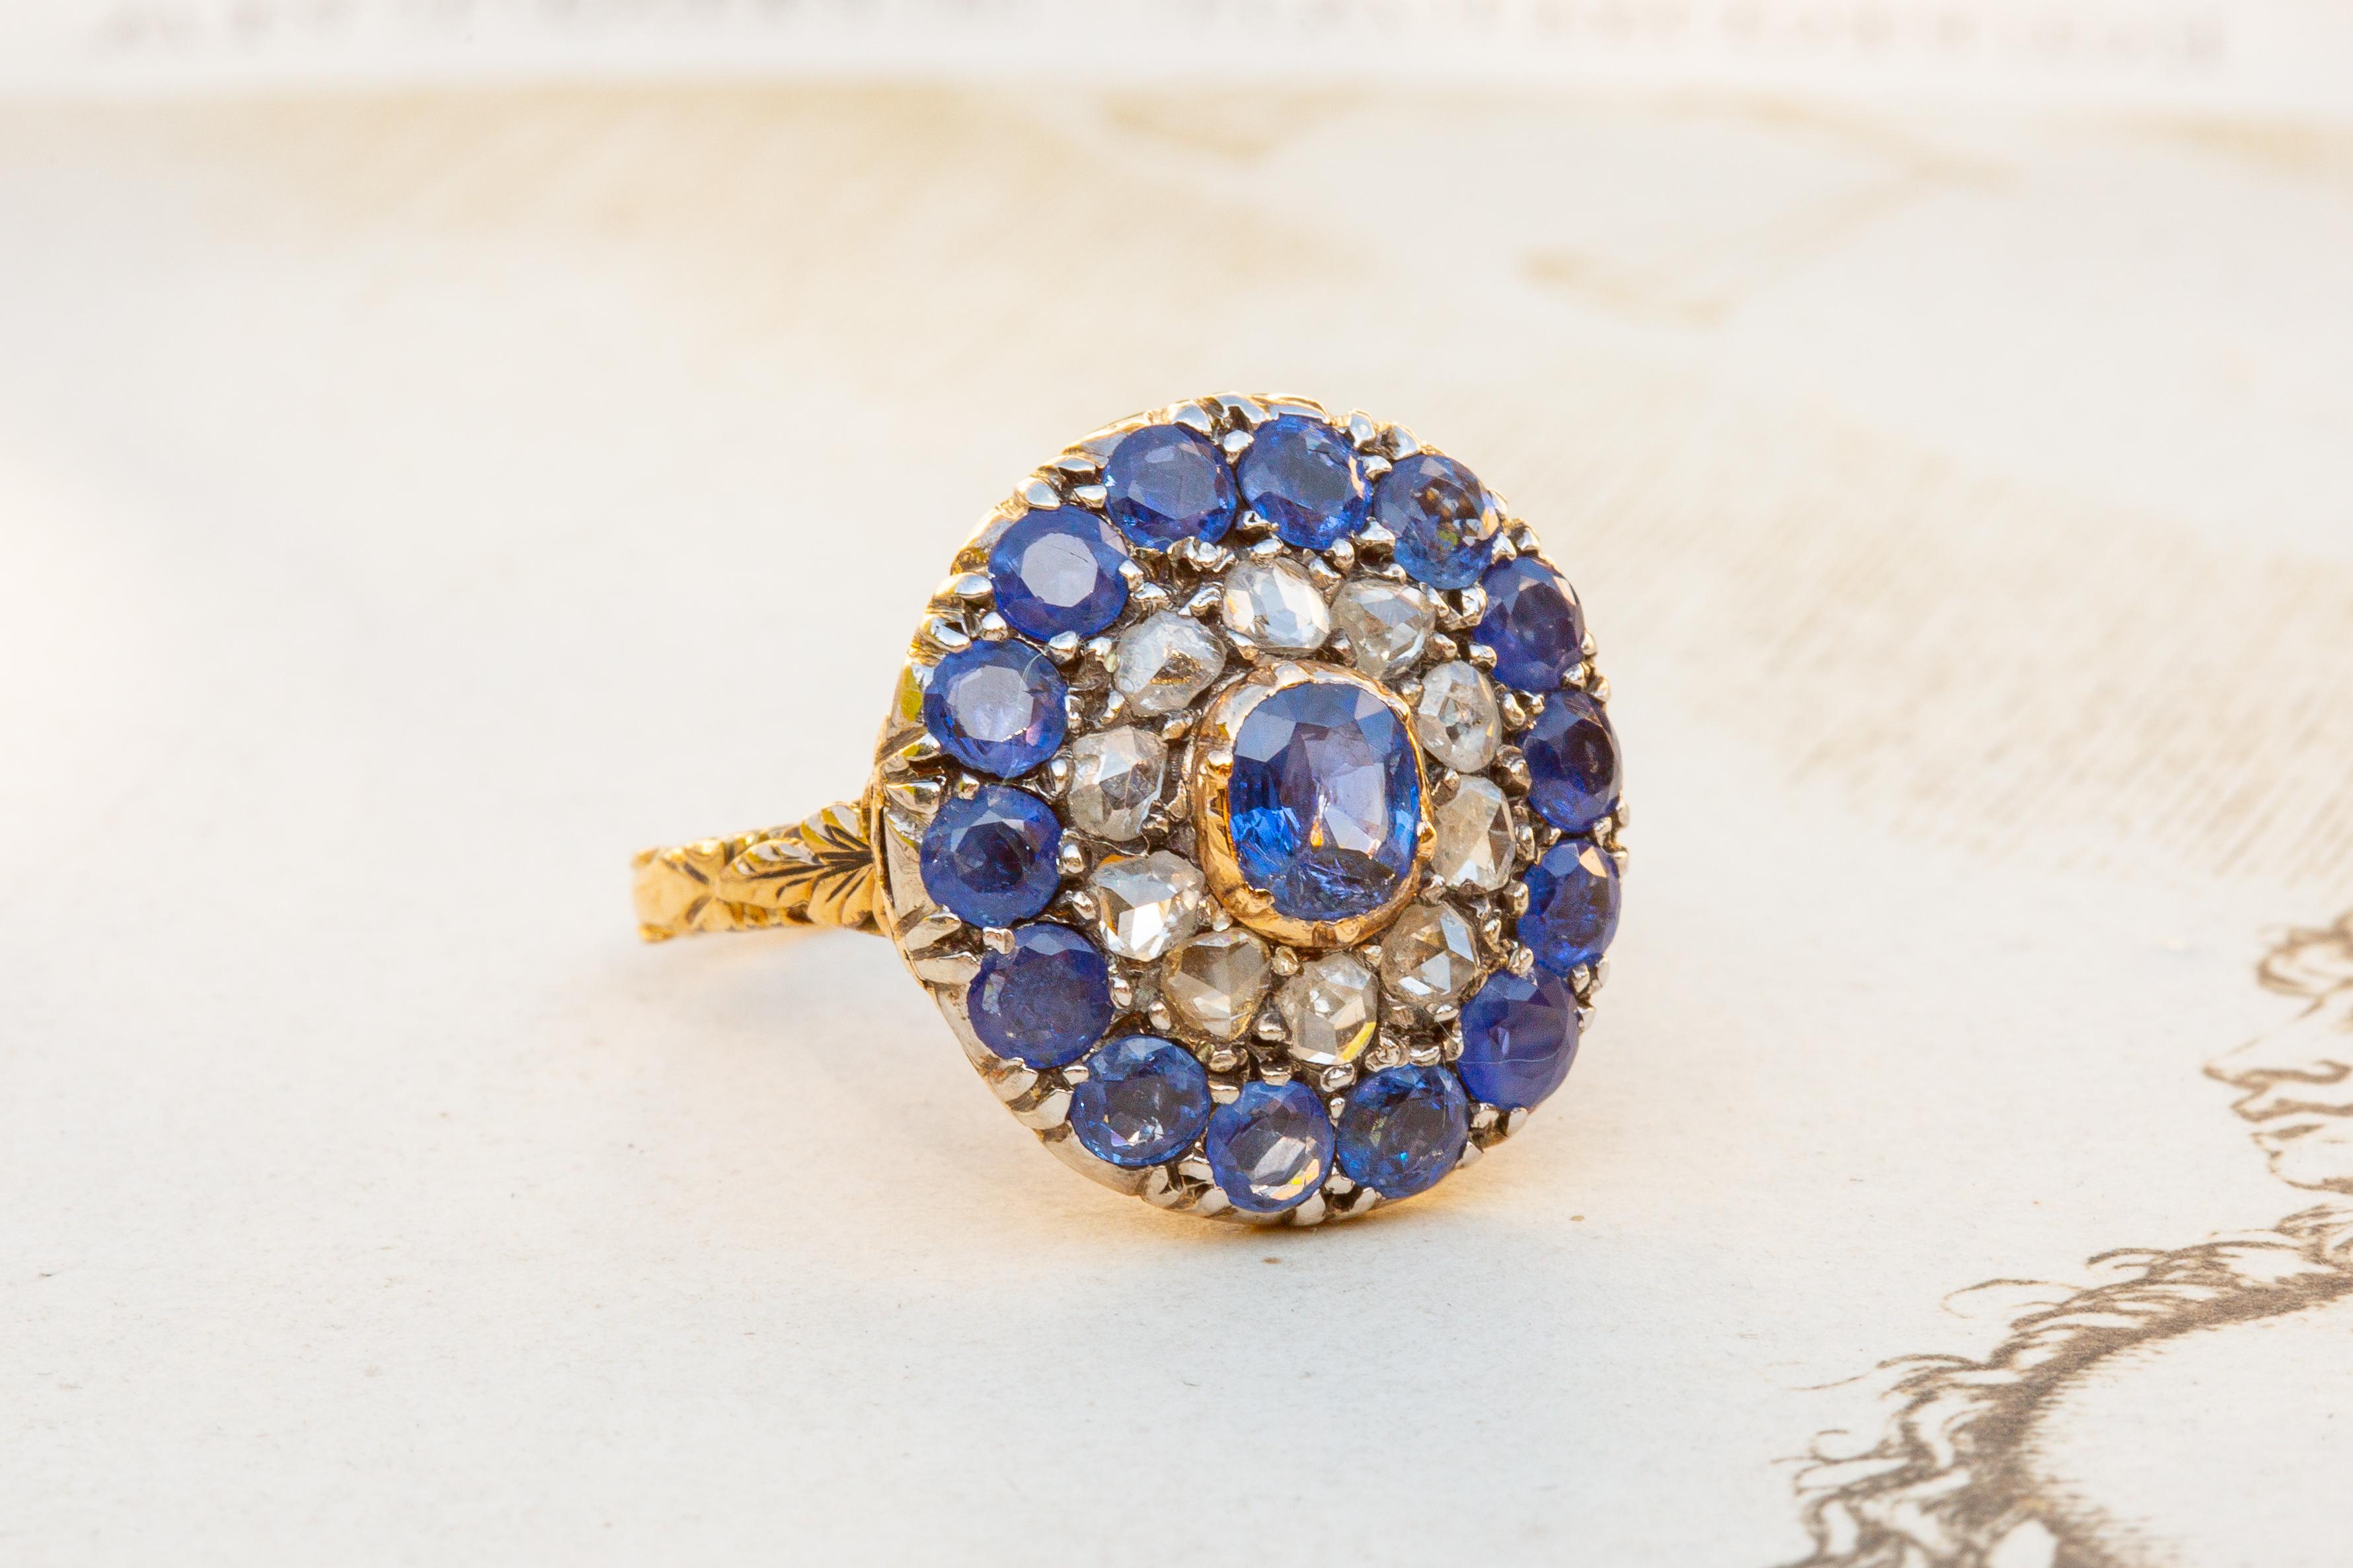 Women's or Men's Antique Sapphire and Diamond Cluster Ring Dutch Georgian Style Ring Early 20th